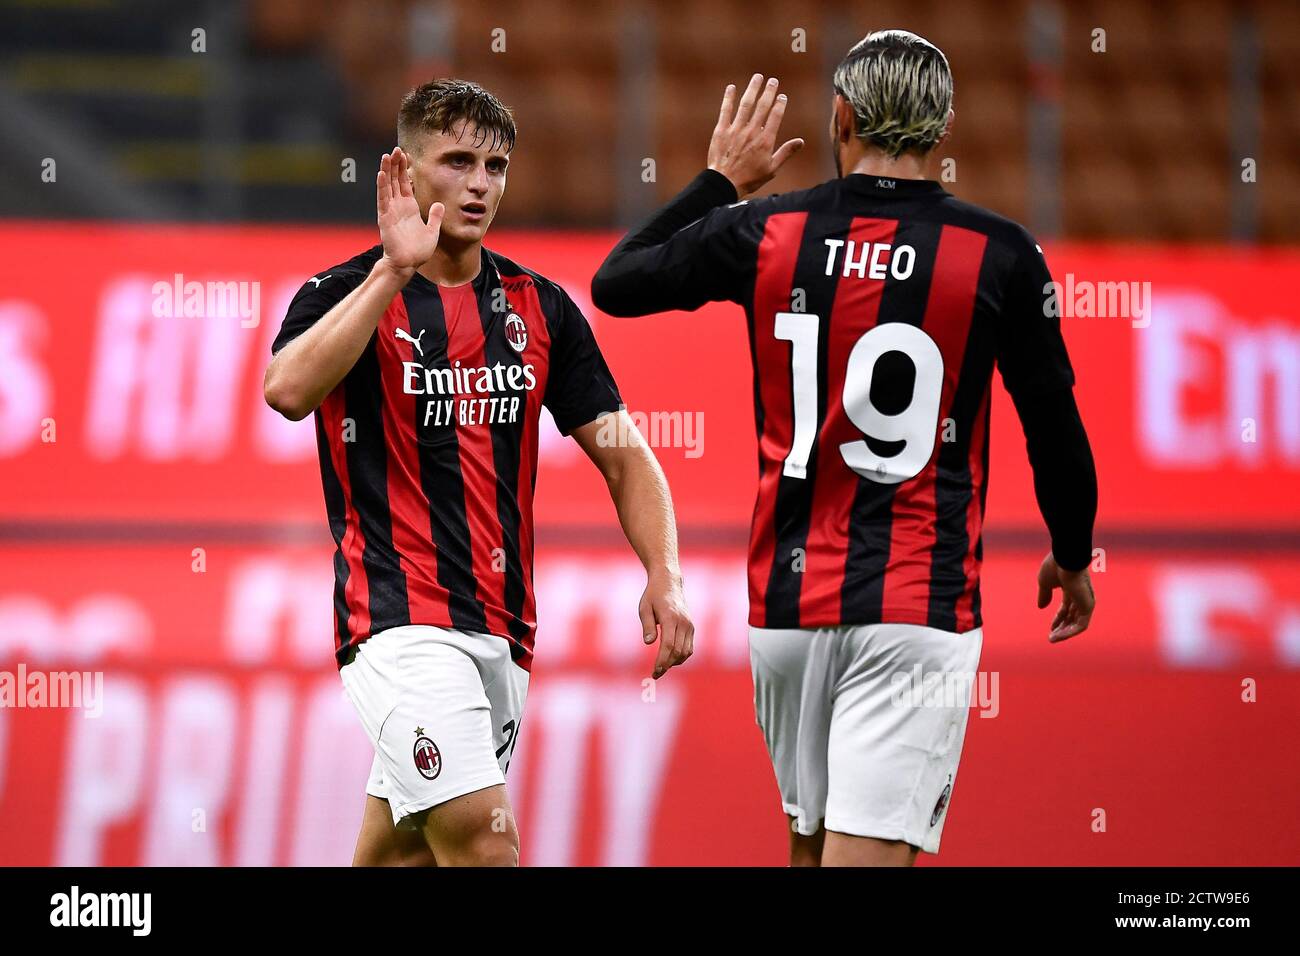 Milan, Italy - 24 September, 2020: Lorenzo Colombo (L) of AC Milan  celebrates with Theo Hernandez of AC Milan after scoring a goal during the  UEFA Europa League Third Qualifying Round football